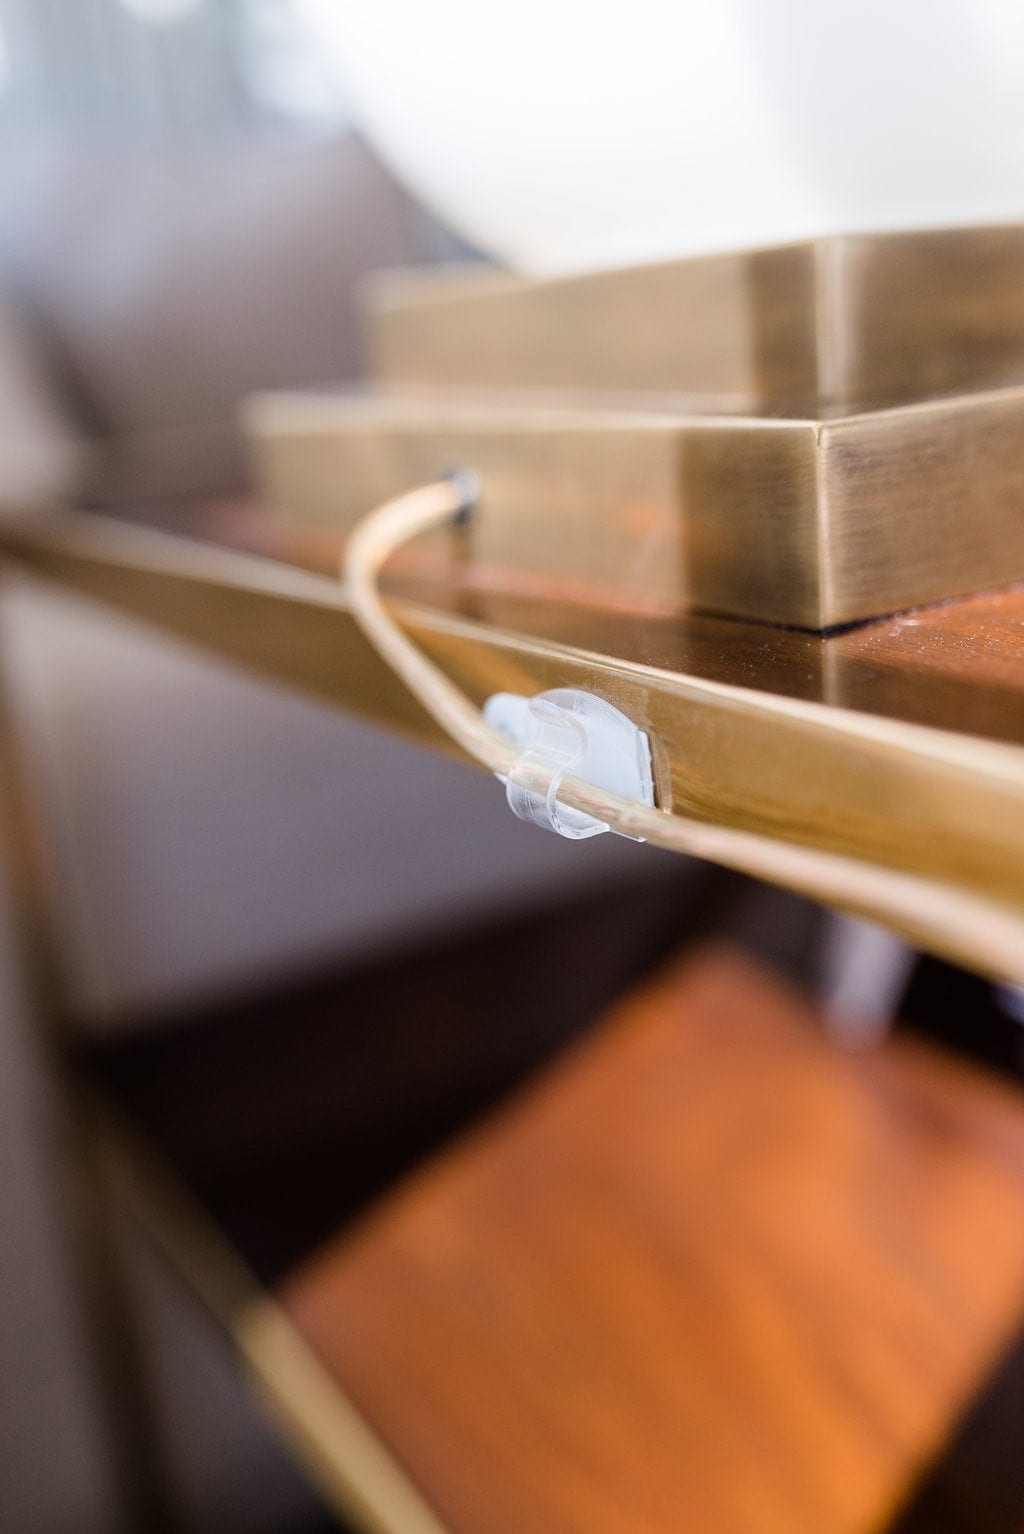 Easy tips to hide cords in your house and keep cords out of view when decorating.